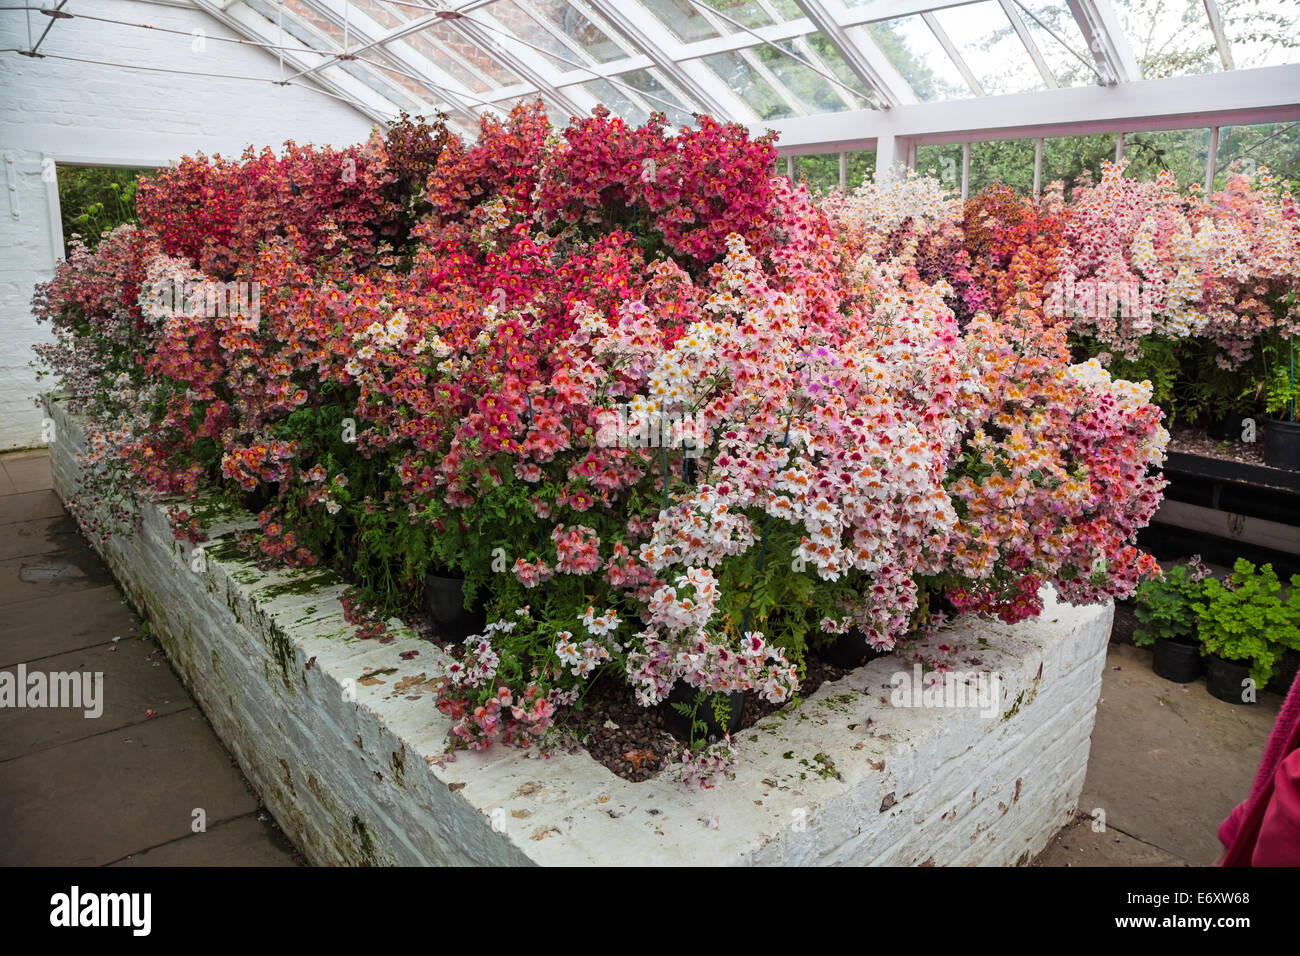 Colourful Schizanthus  flowers in the hot house or greenhouse at Tatton Hall Tatton Park gardens Tatton Cheshire England UK Stock Photo